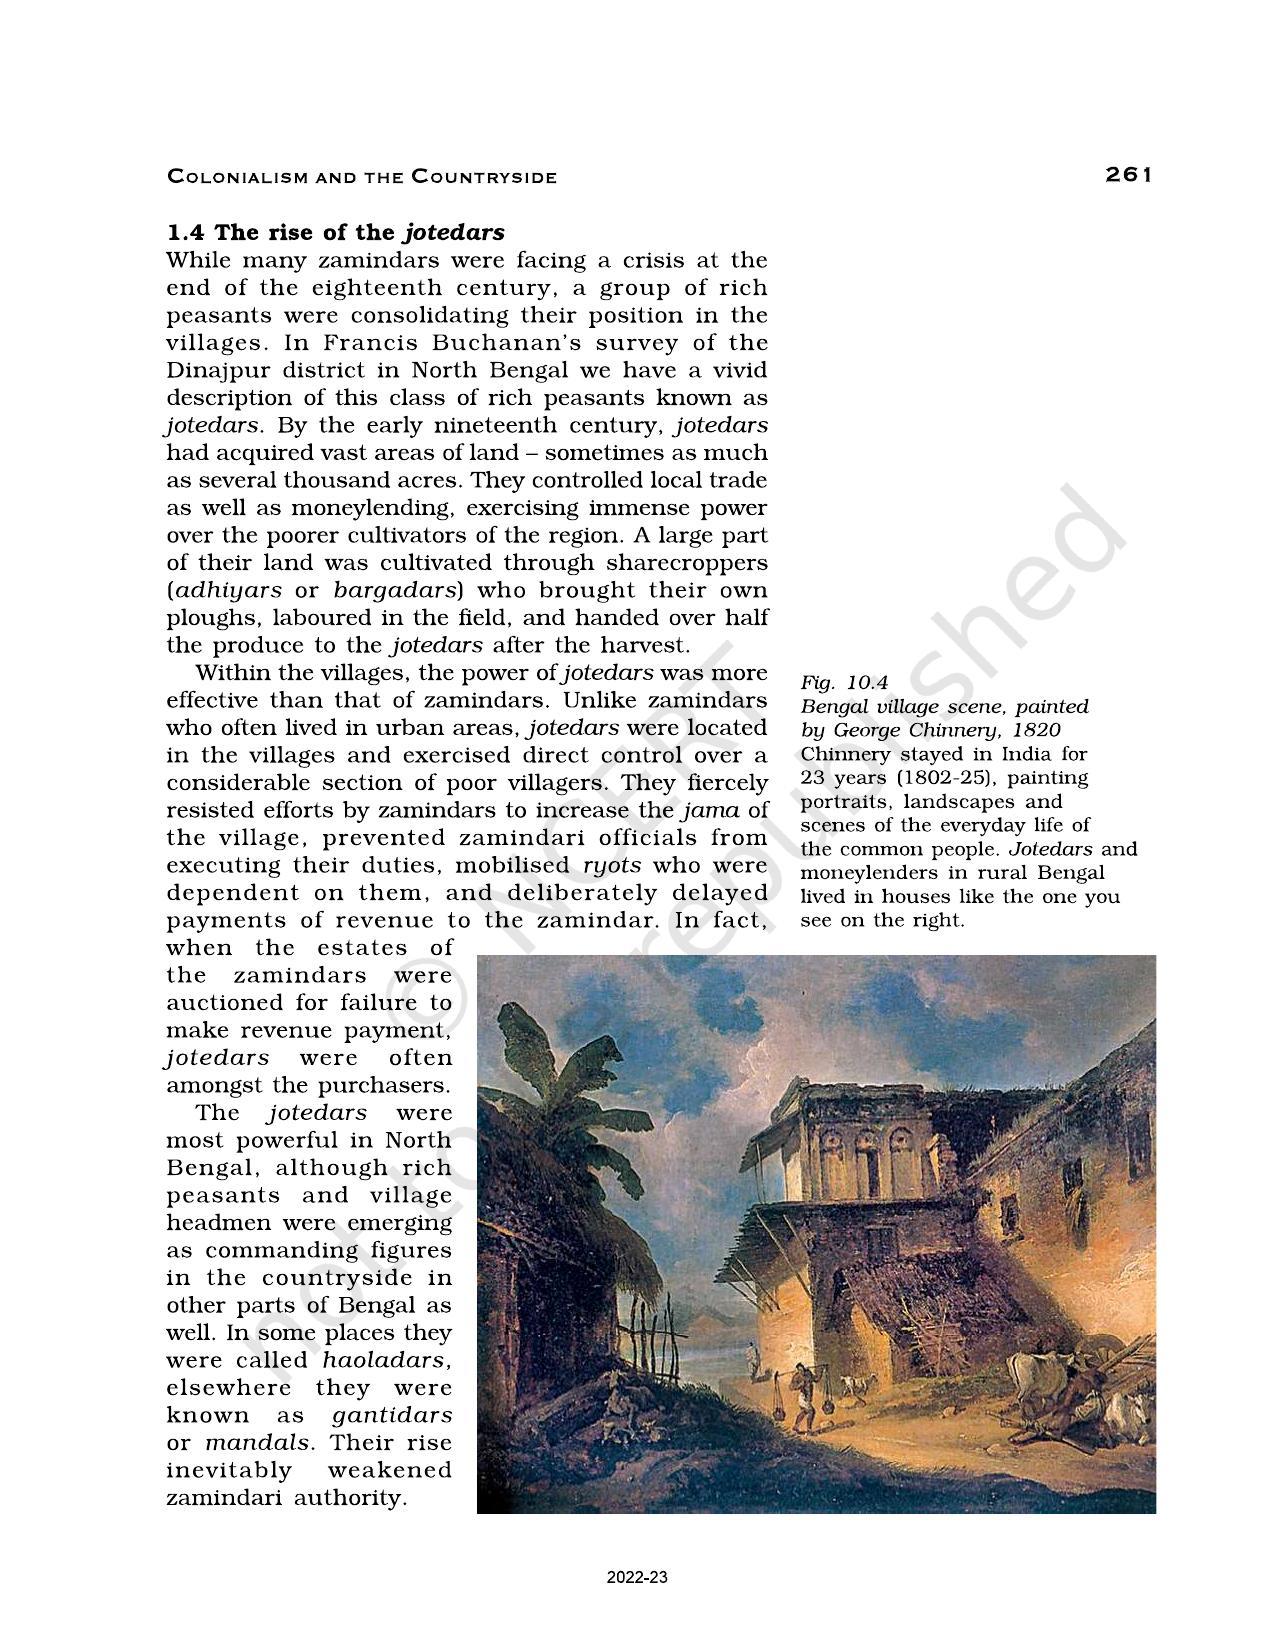 NCERT Book for Class 12 History (Part-II) Chapter 10 Colonialism and the Countryside - Page 5